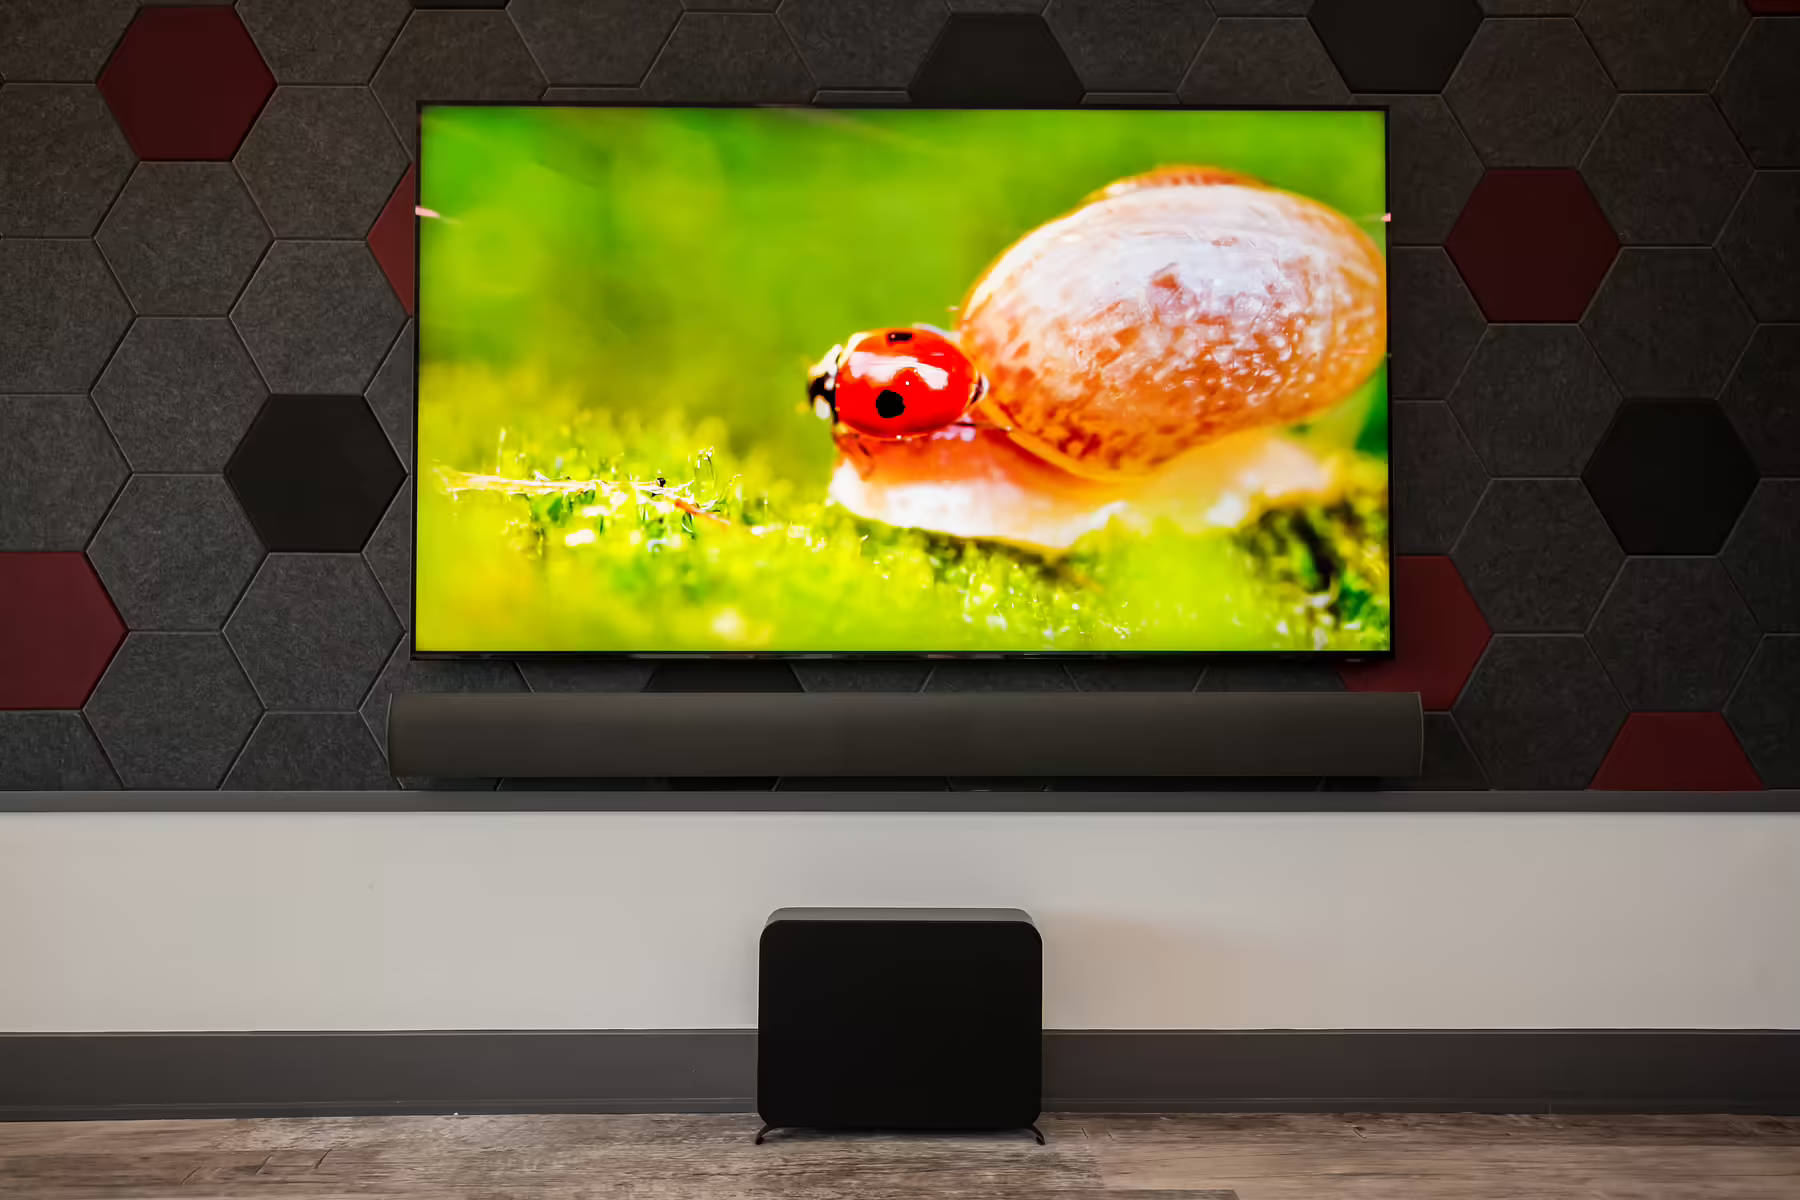 Flat screen tv mounted on a gray hexagon wall, showing a bright green grassy scene with a lady bug sitting on a mushroom.